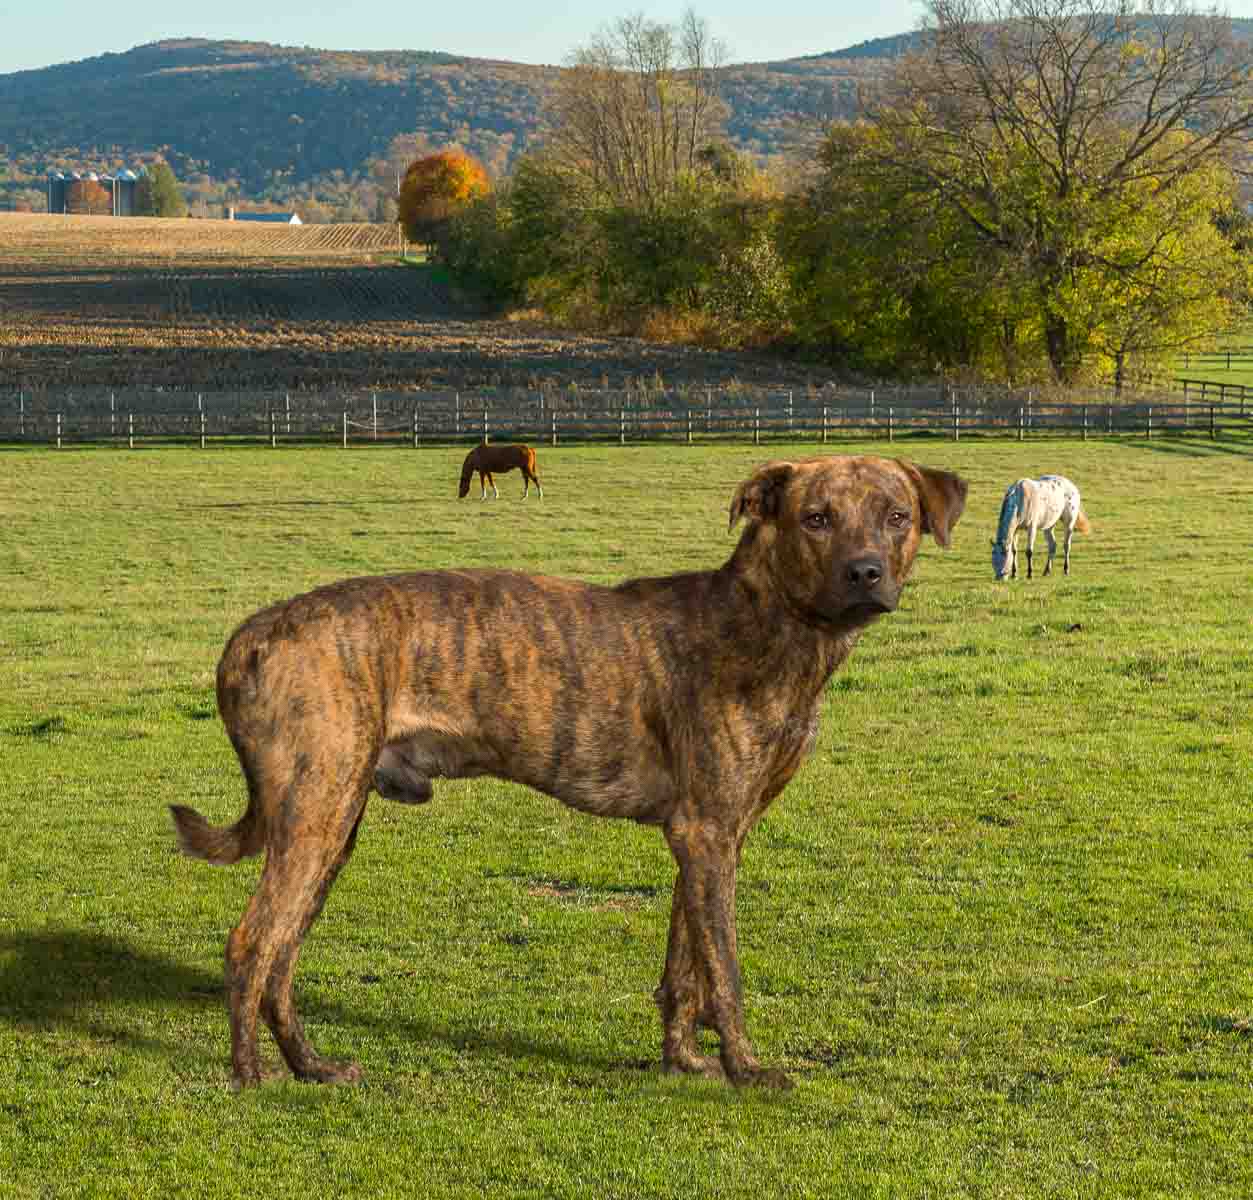 A dog standing in the grass with other dogs.